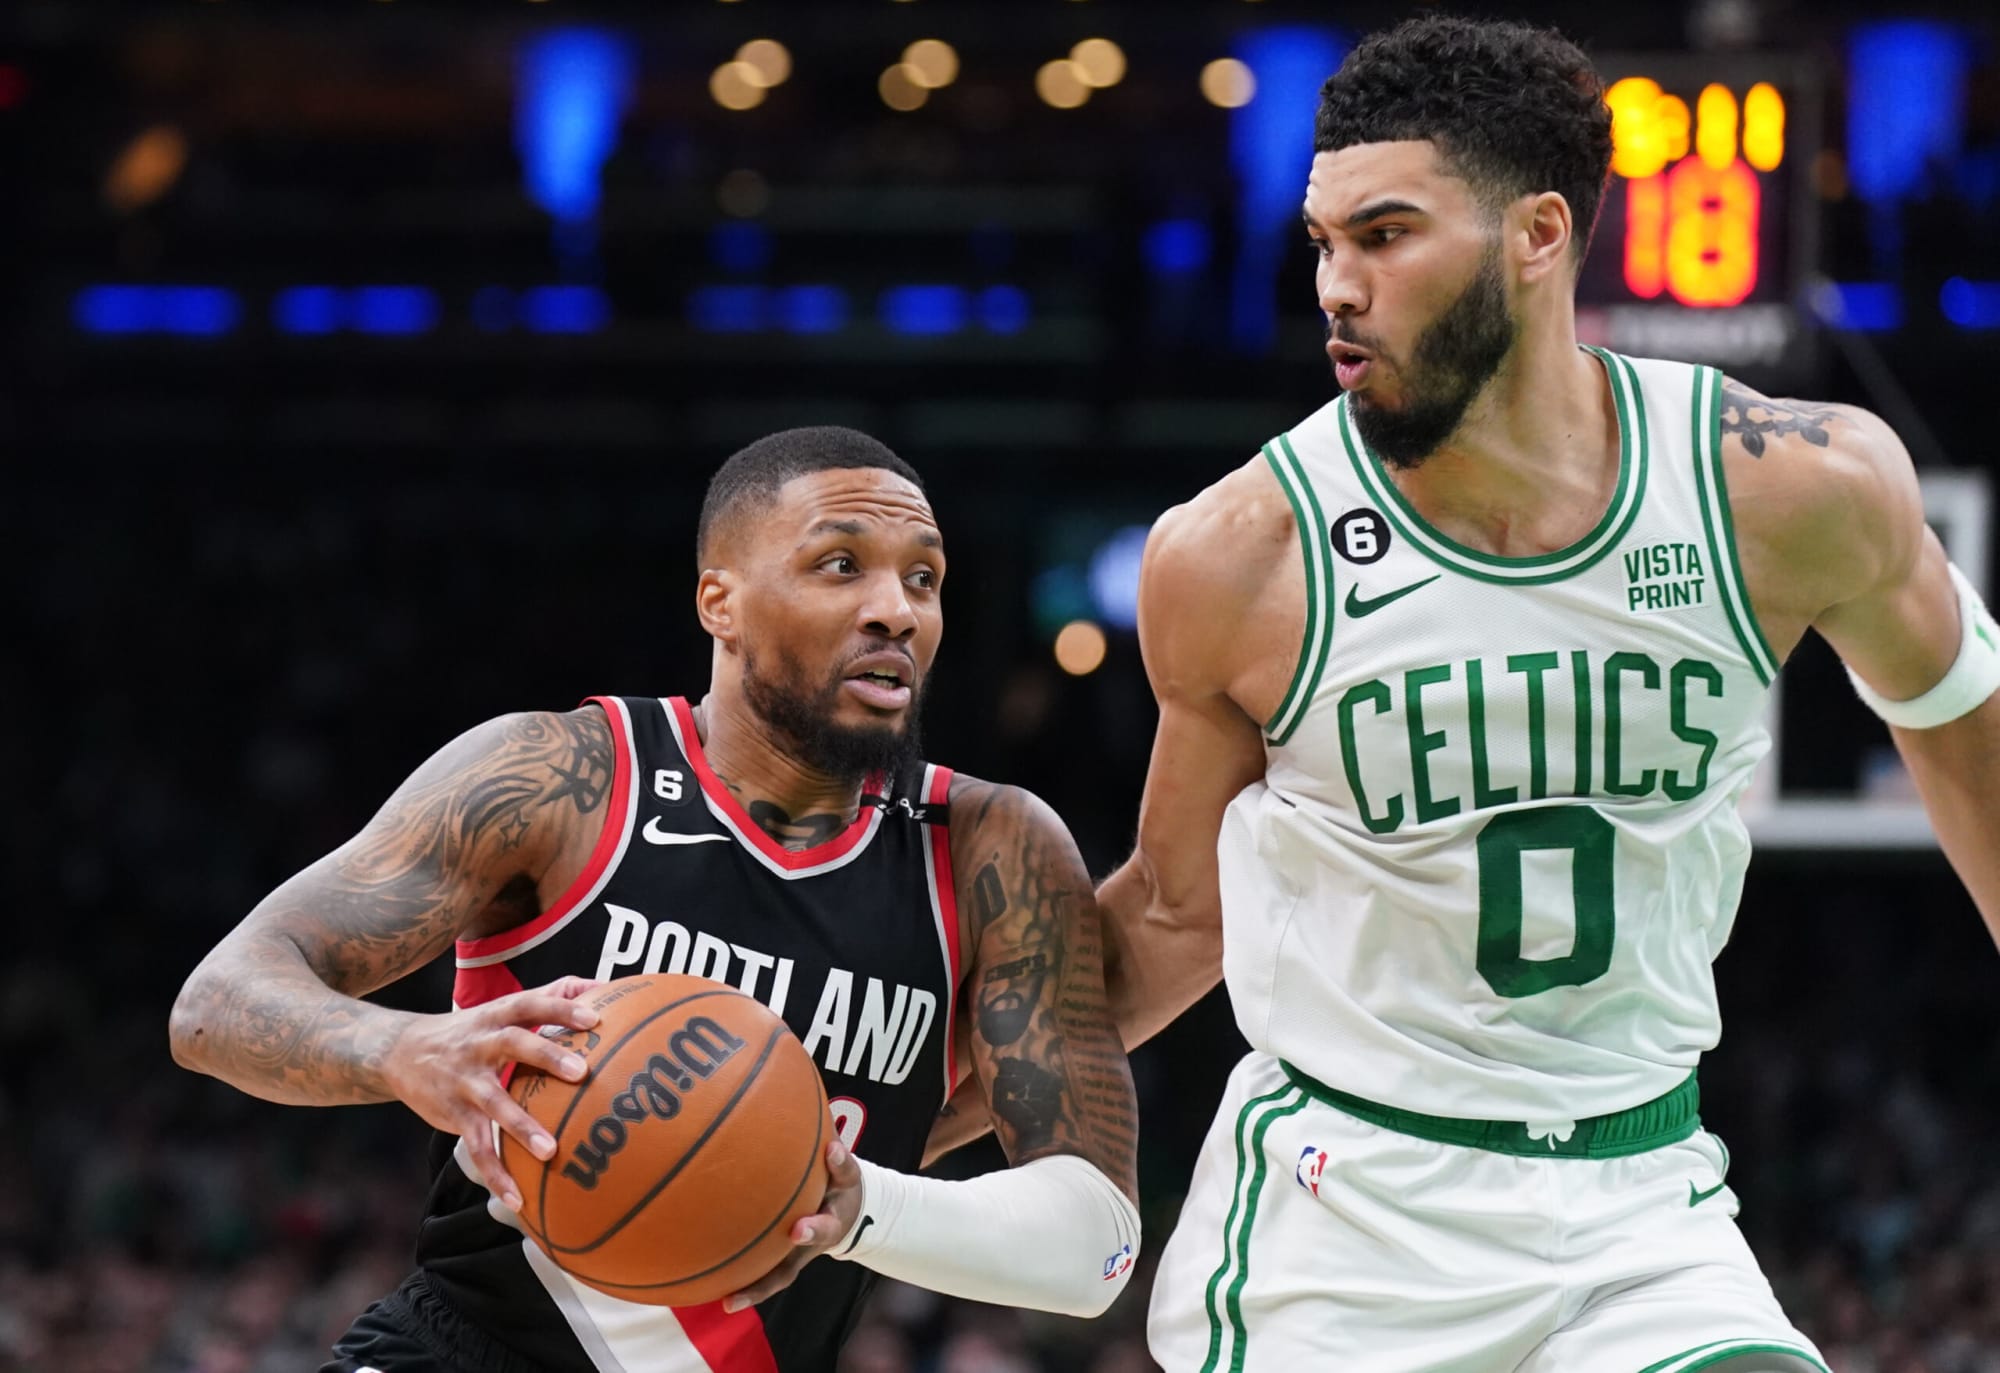 Celtics Expressed Interest in Trading for NBA Champion Before